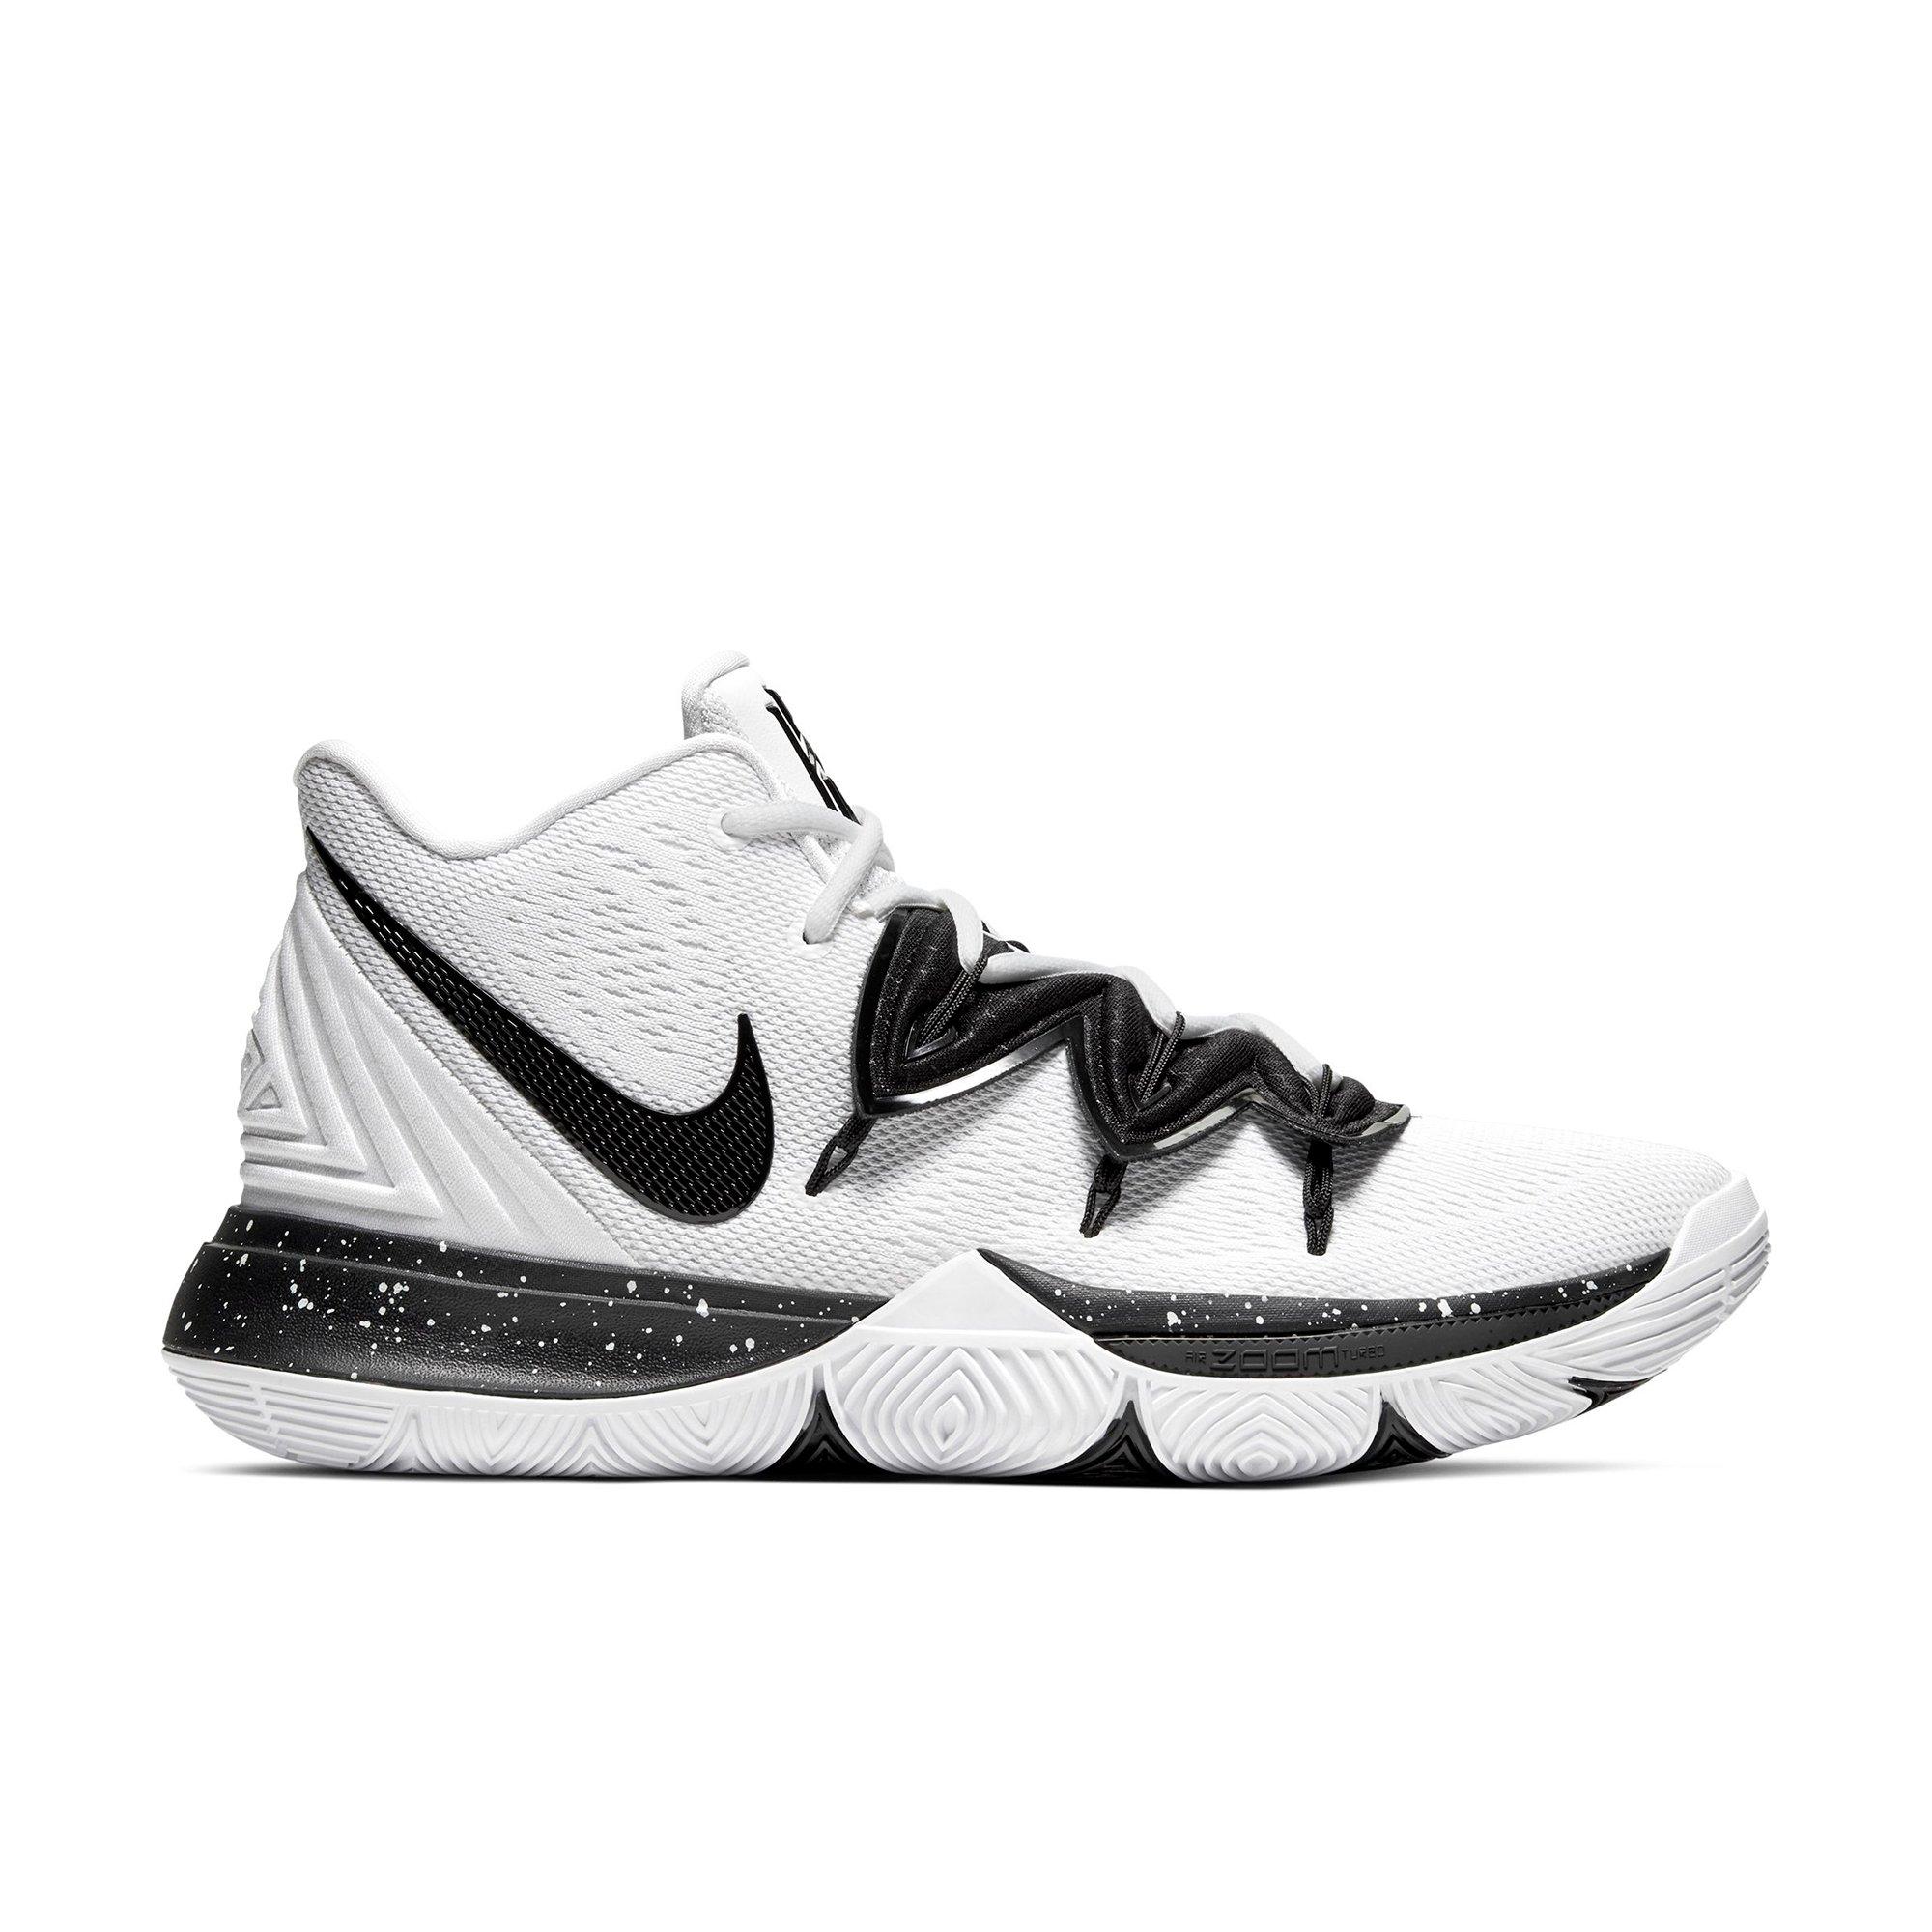 black and white kyrie 5s